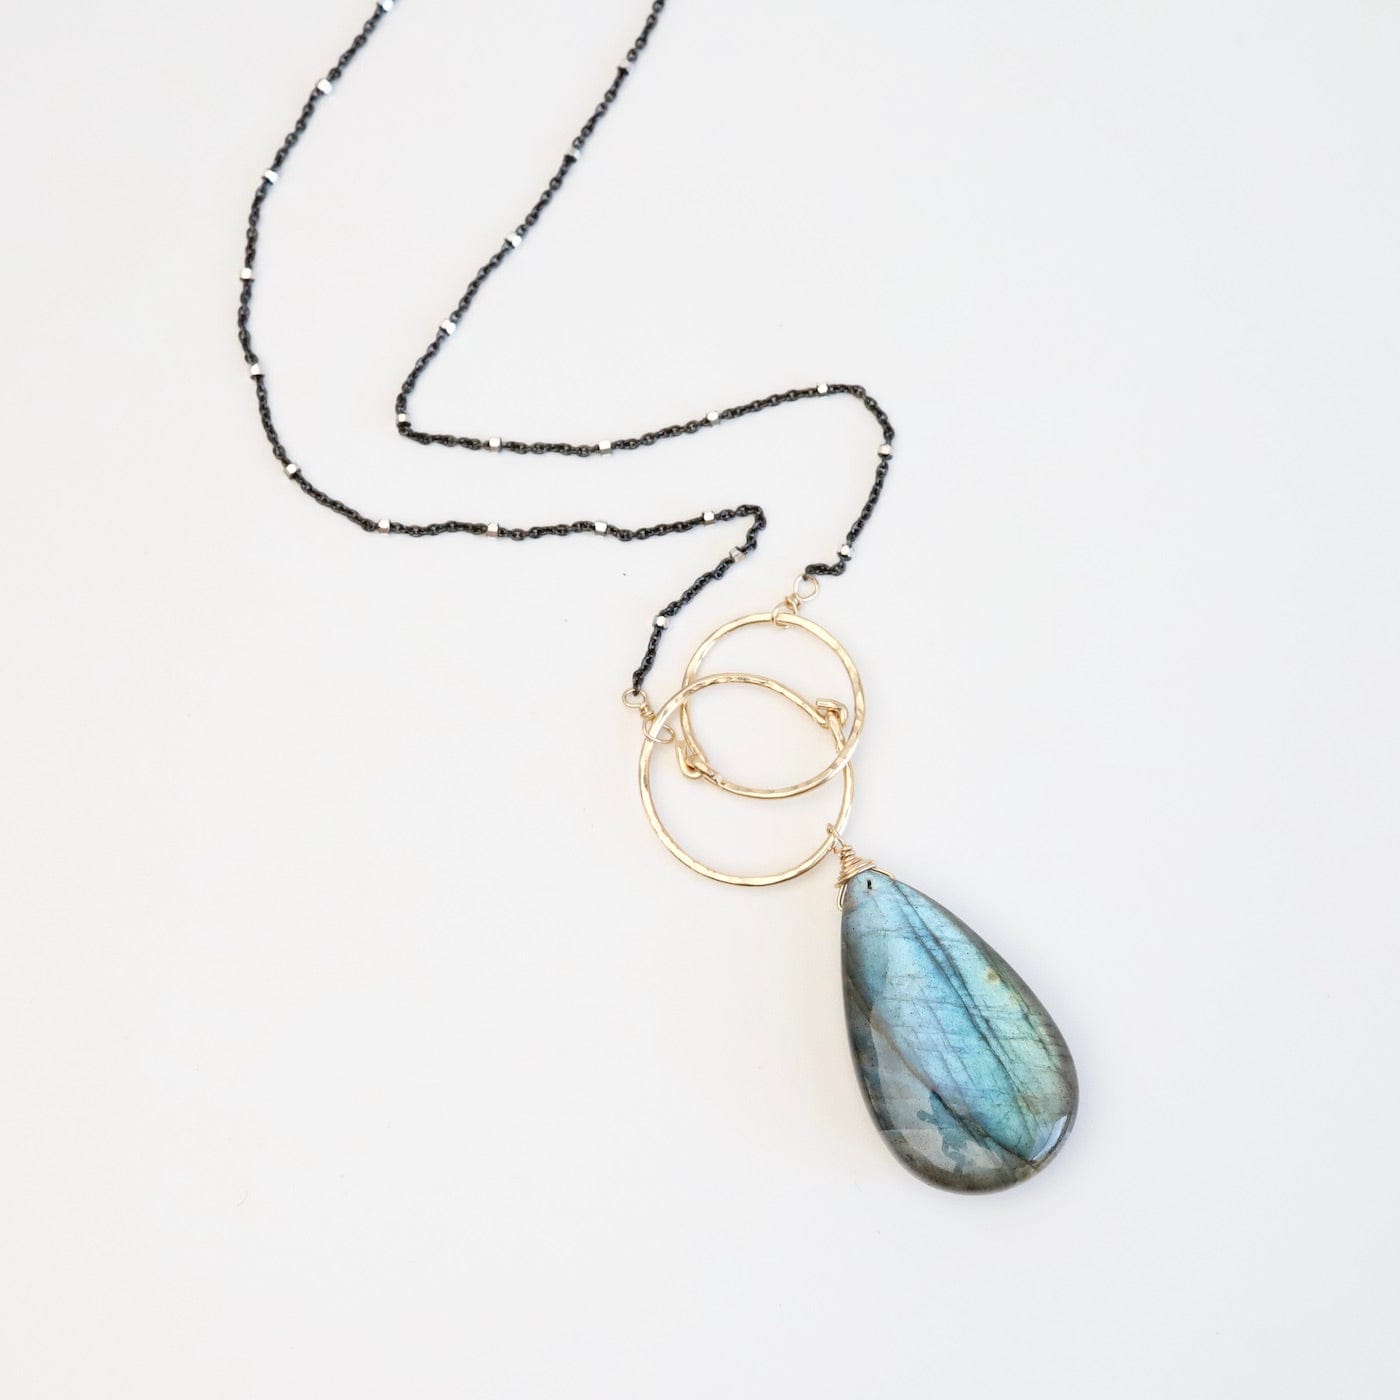 NKL Double Gold Filled Rings with Large Labradorite Necklace